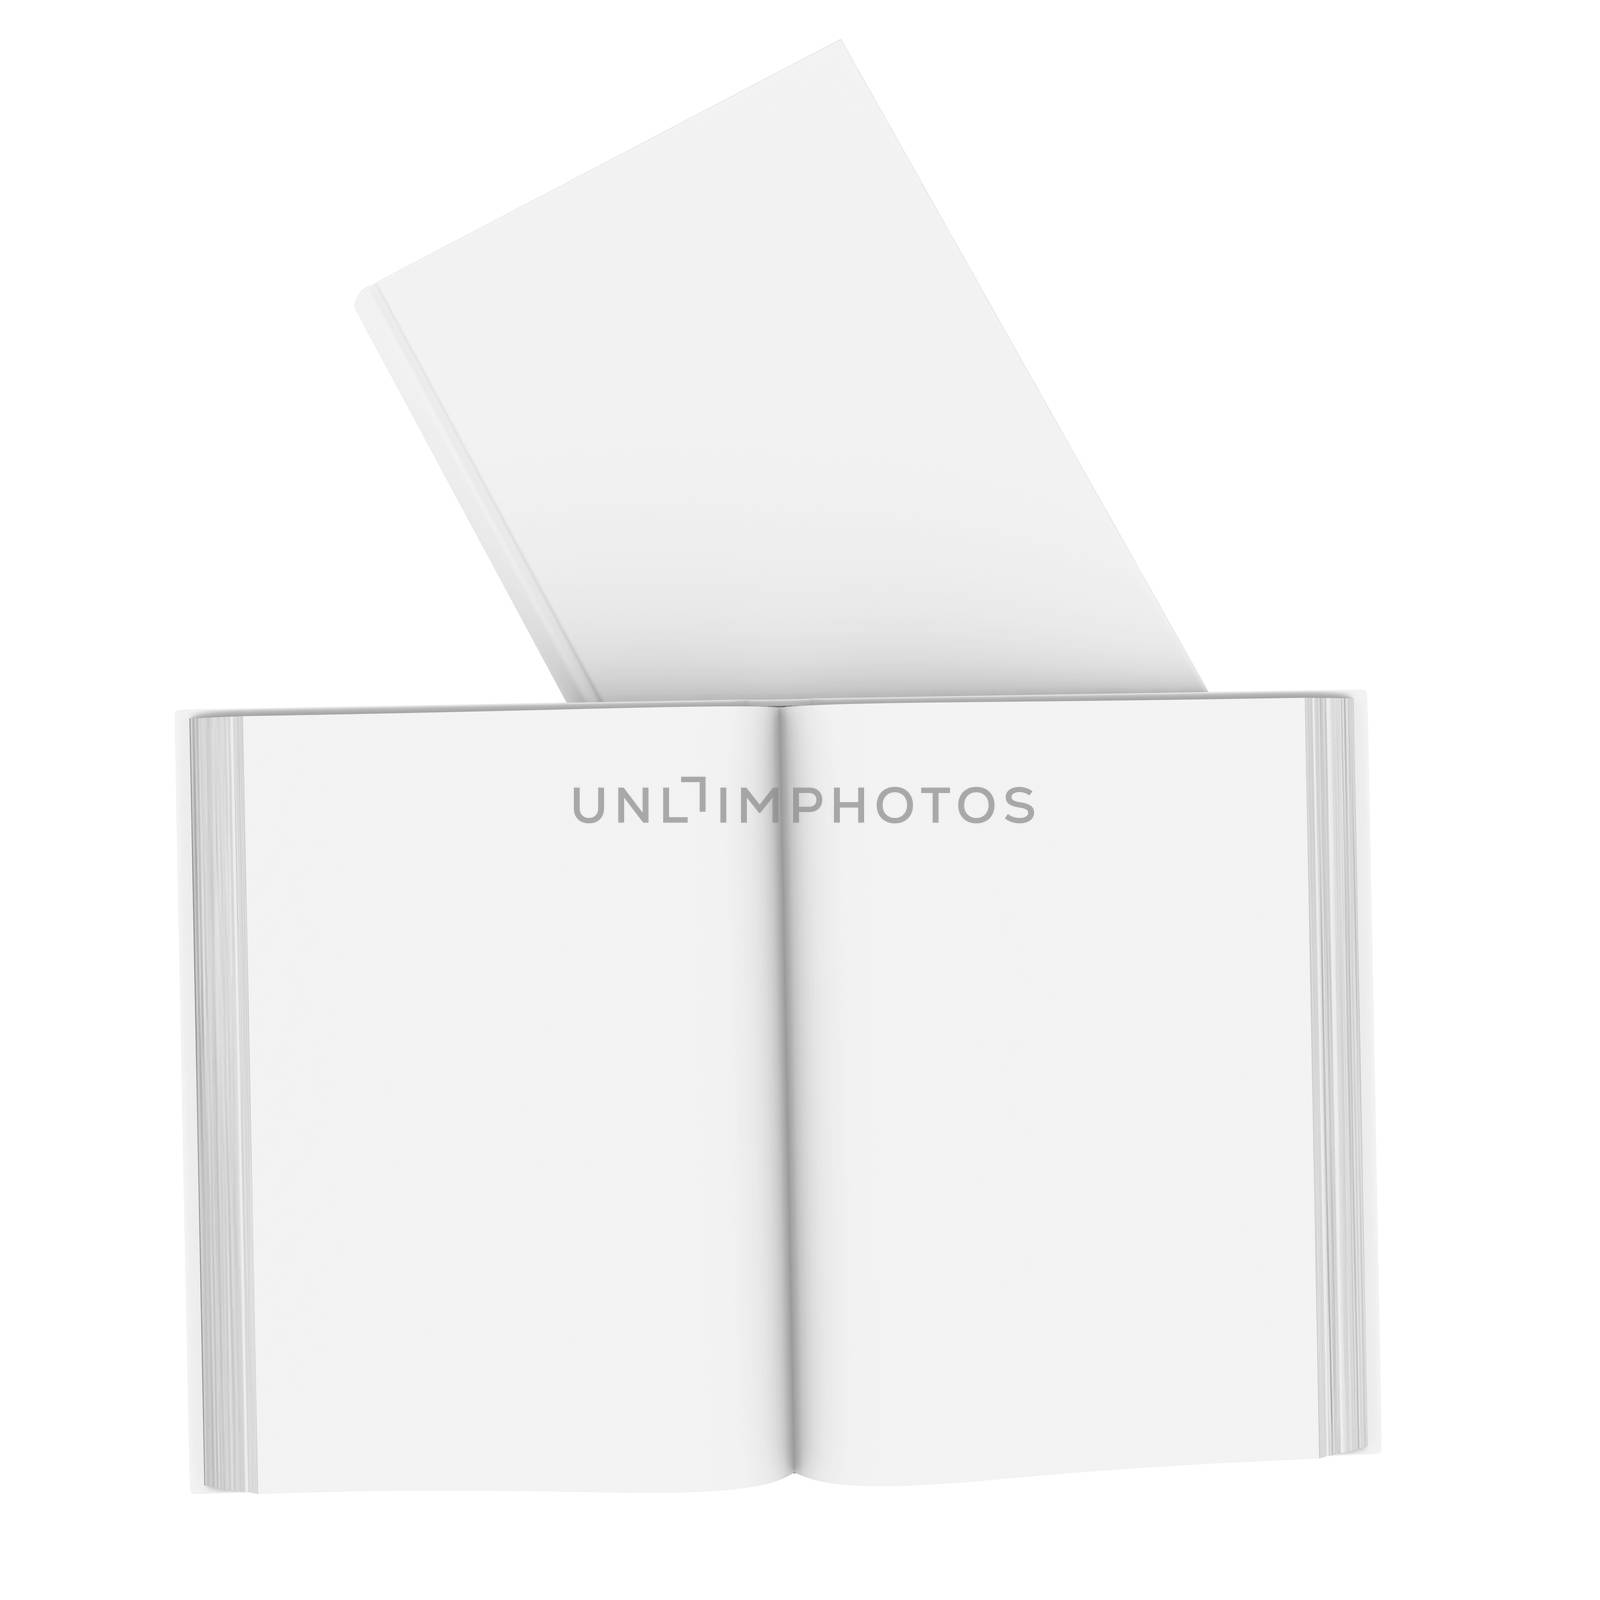 White books. Isolated render on a white background